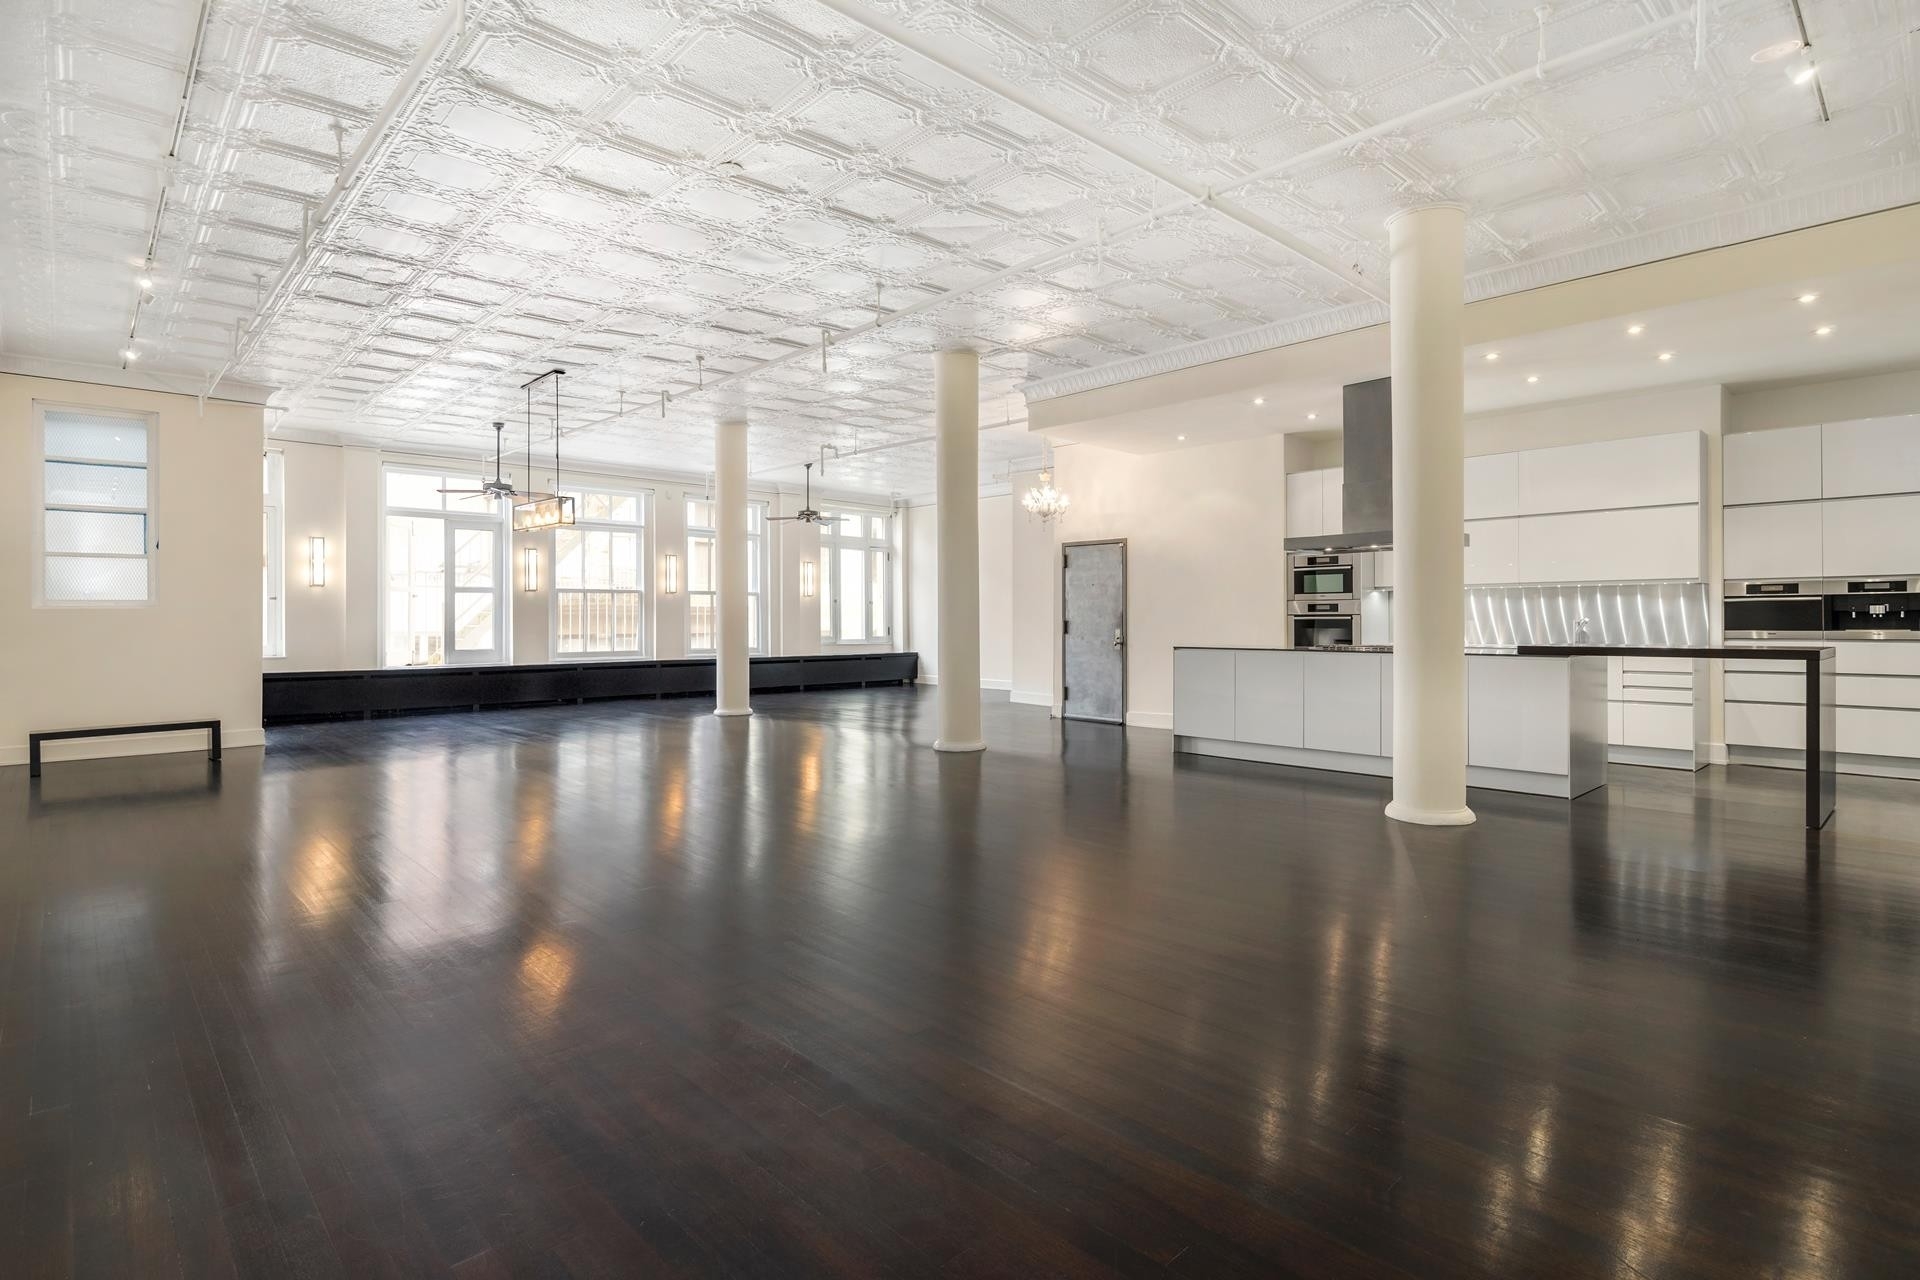 Co-op Properties for Sale at 75 GRAND ST, 2W SoHo, New York, New York 10013